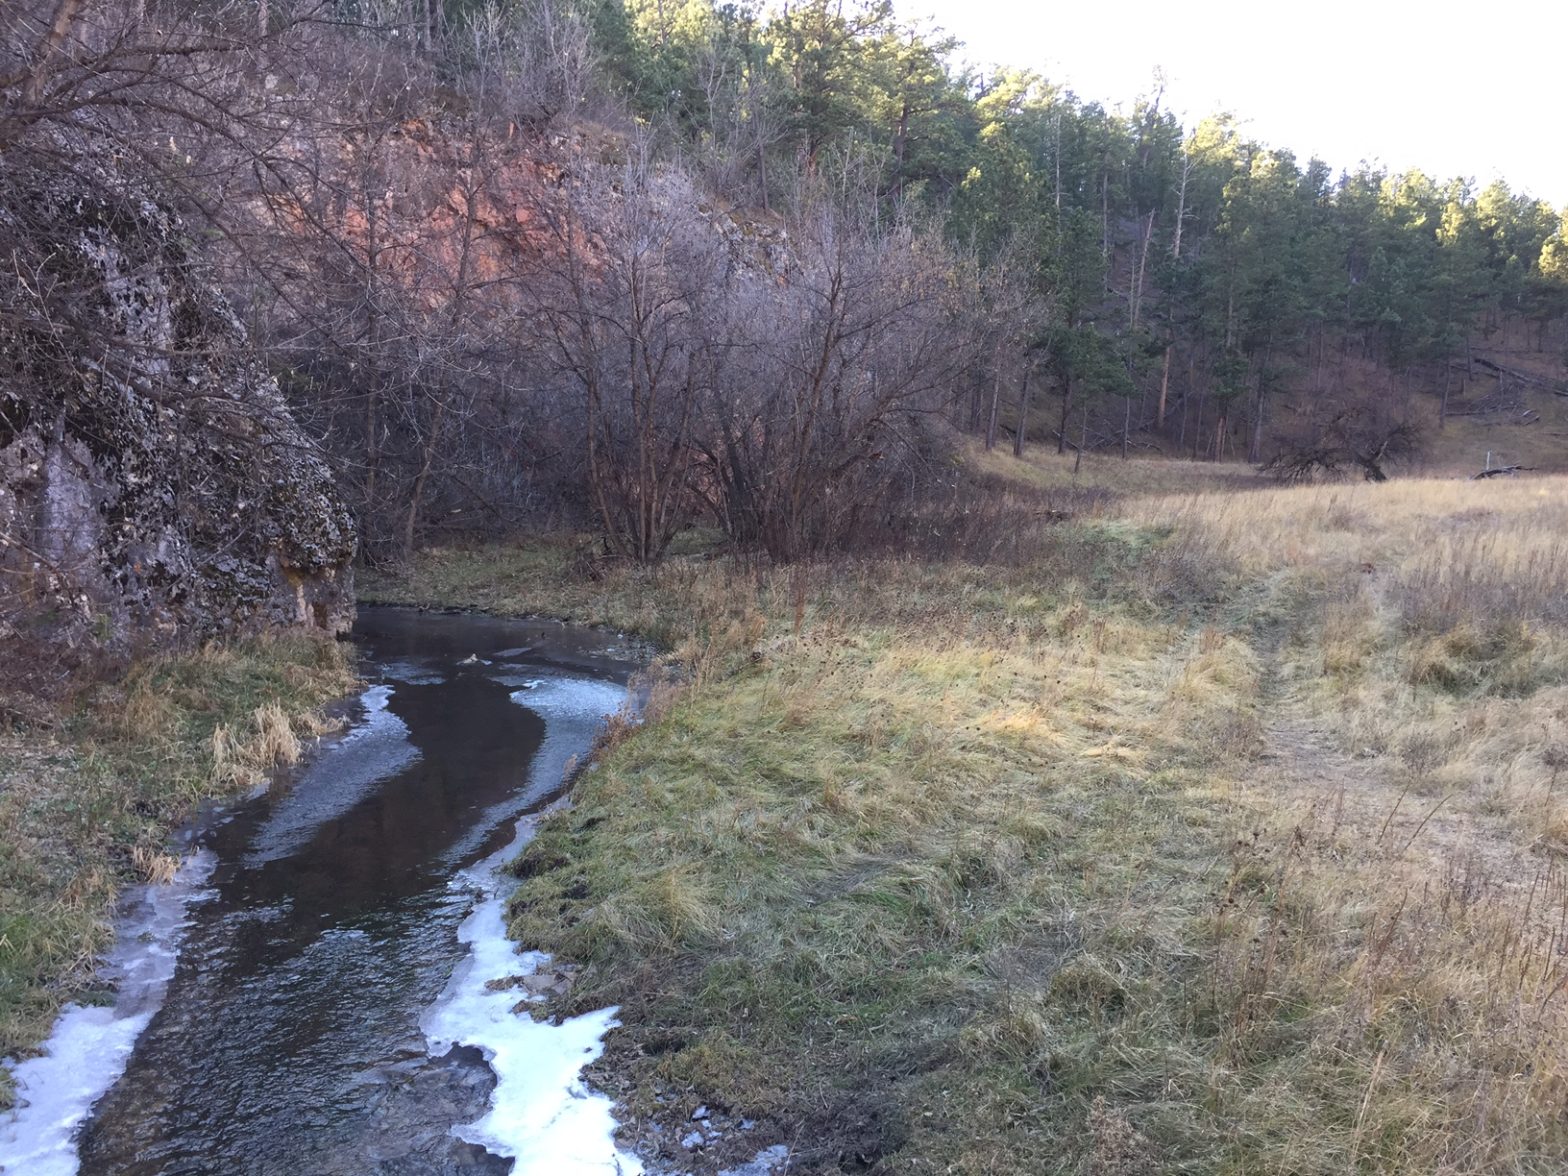 A winter scene. A small, icy creak meanders through a brown-grass meadow with bare trees on its banks and green pine trees in the background.